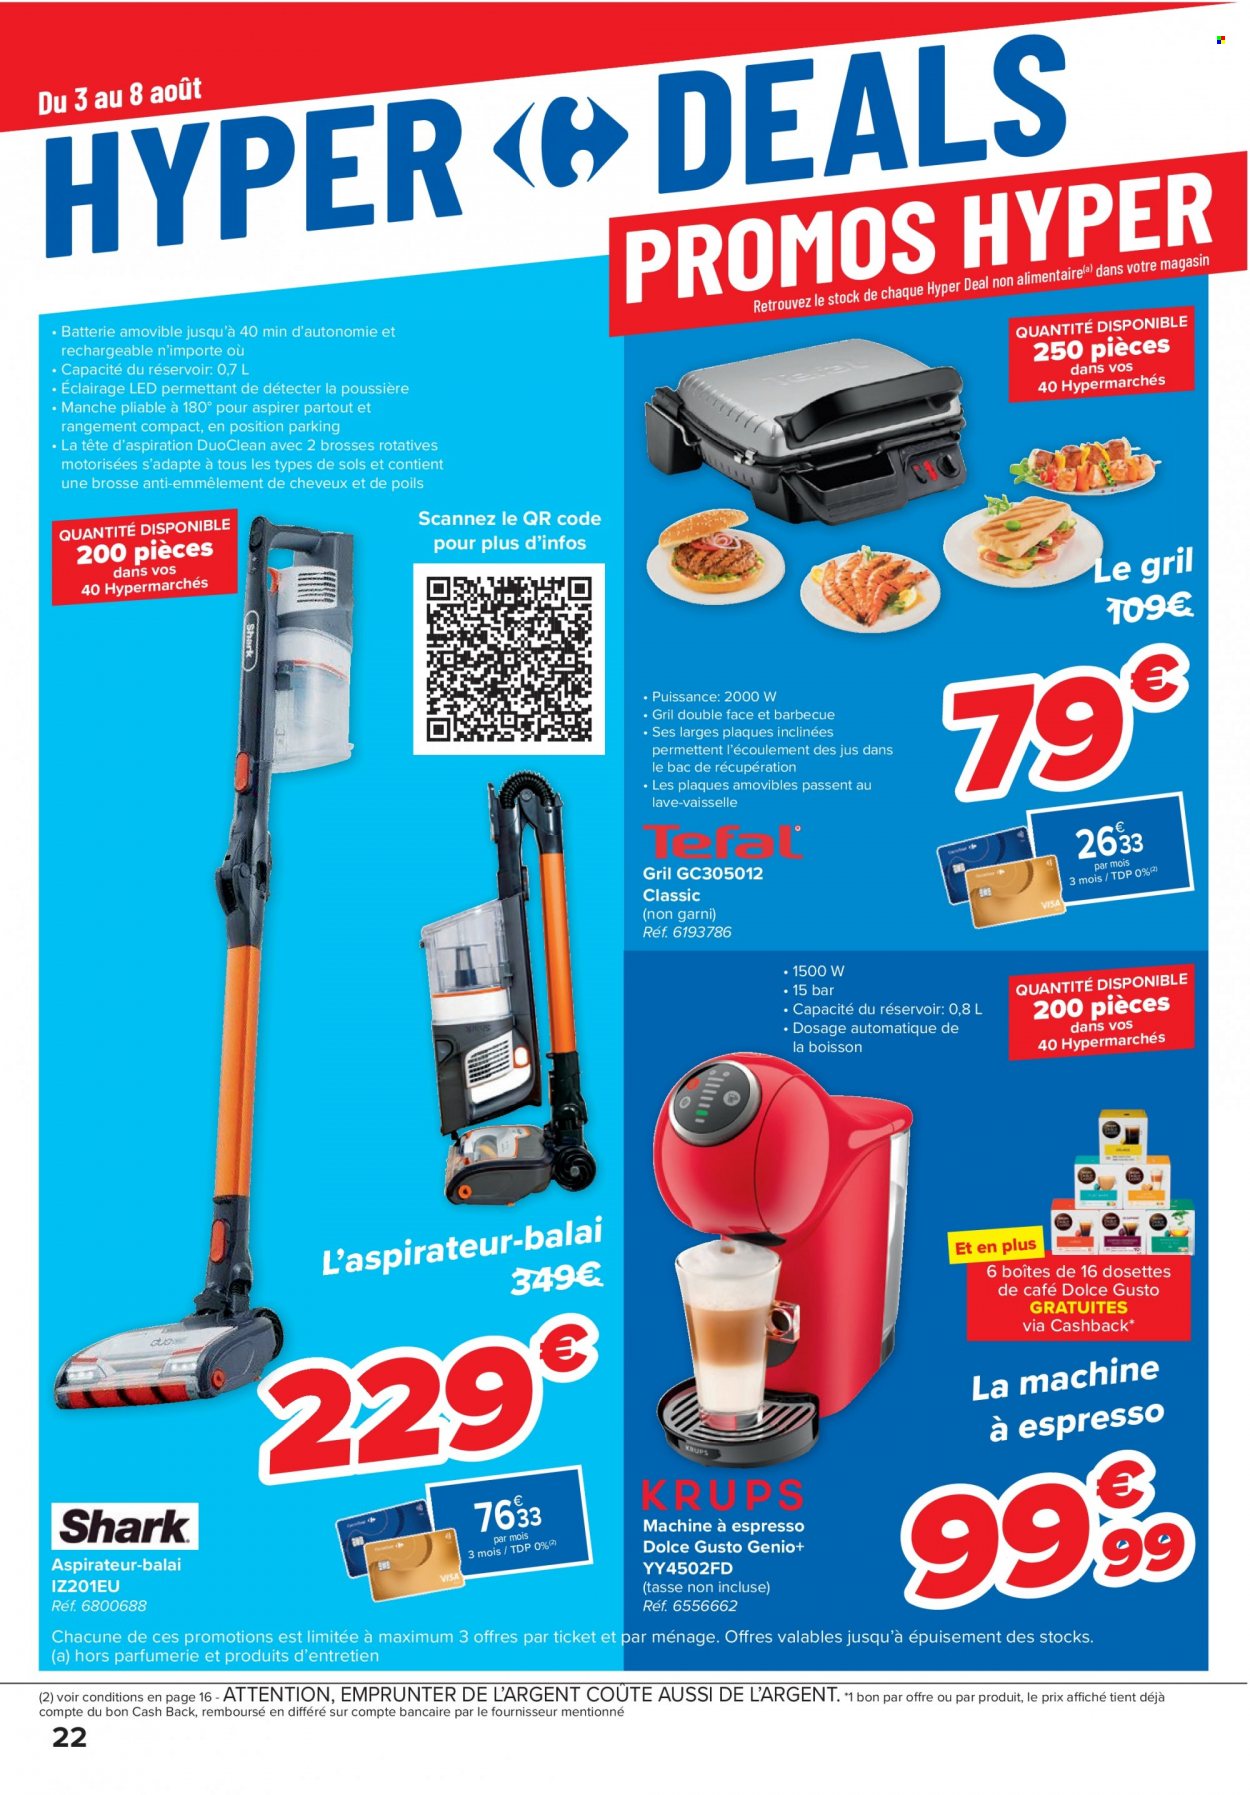 Catalogue Carrefour hypermarkt - 3.8.2022 - 16.8.2022. Page 22.